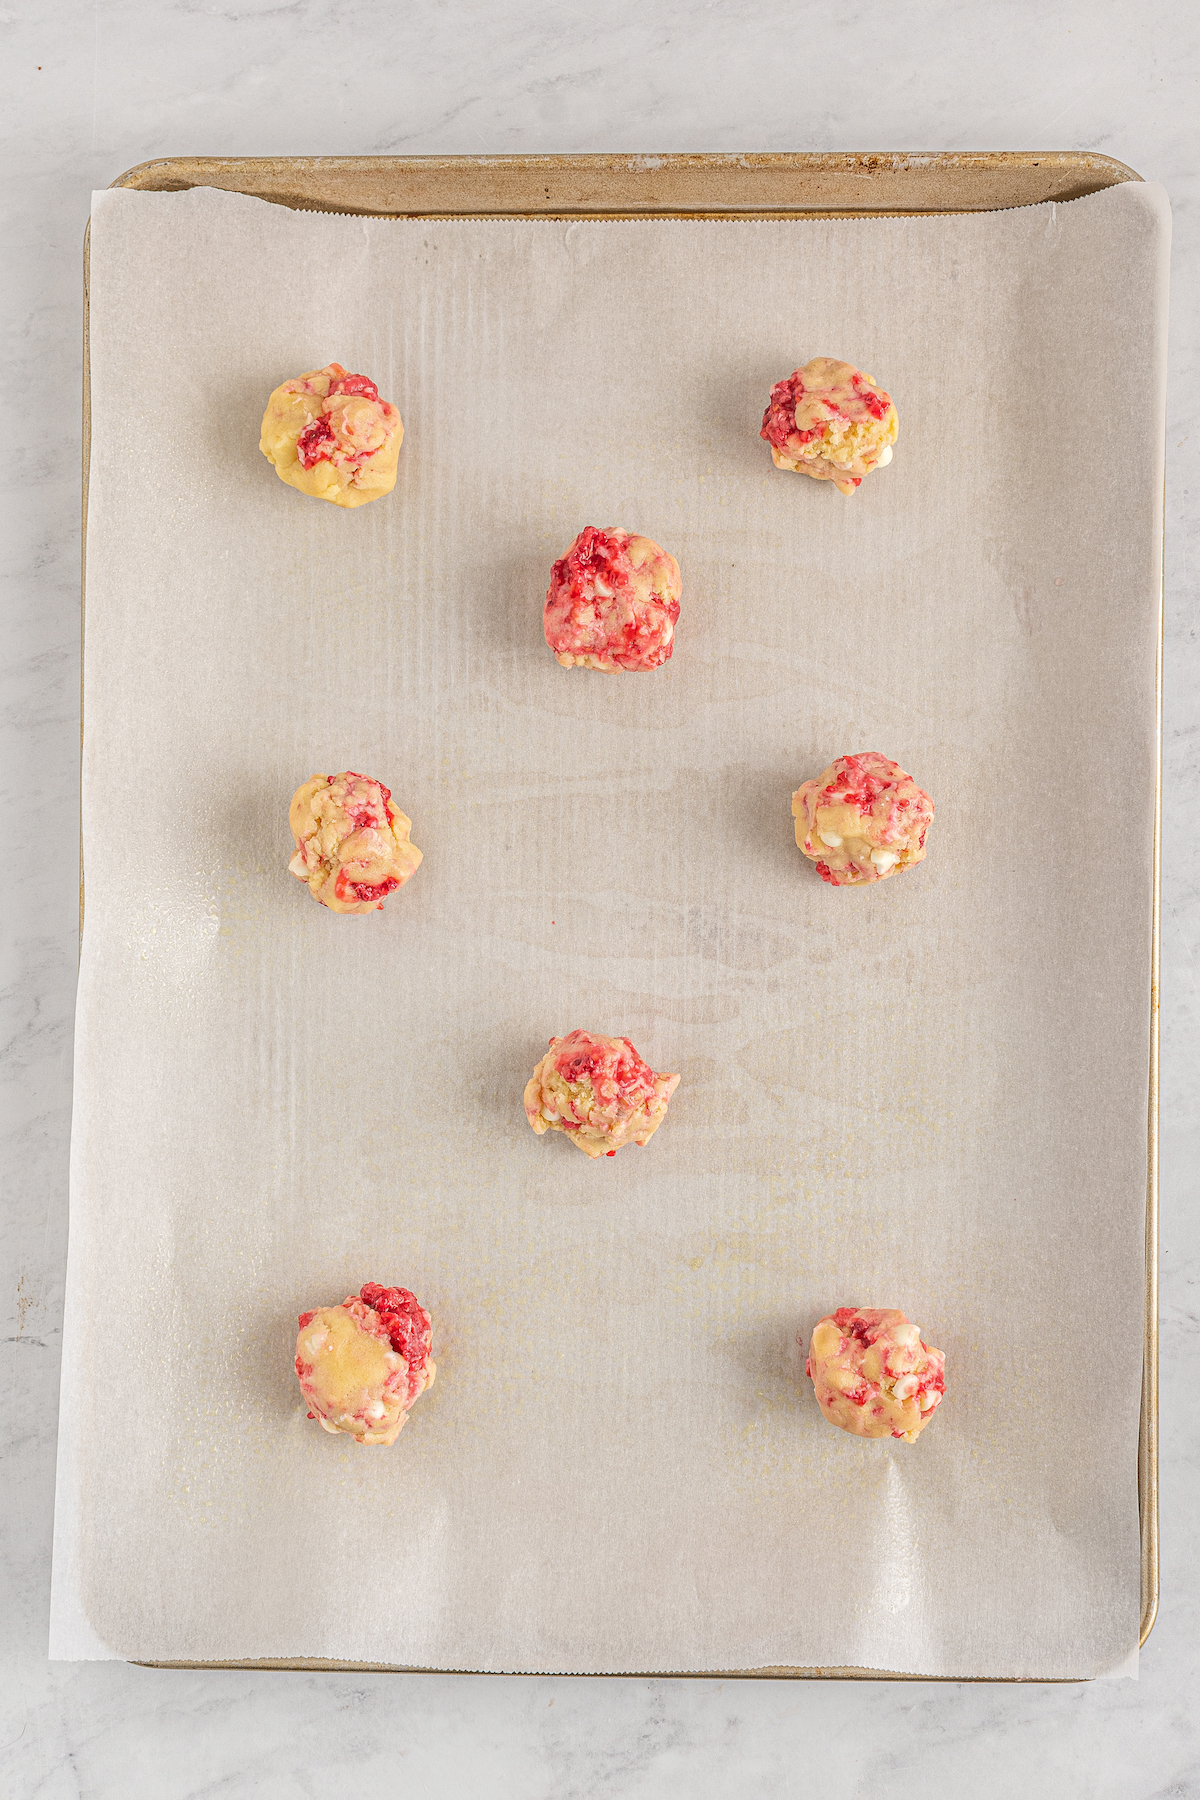 Cookie dough balls on a parchment-lined cookie sheet.